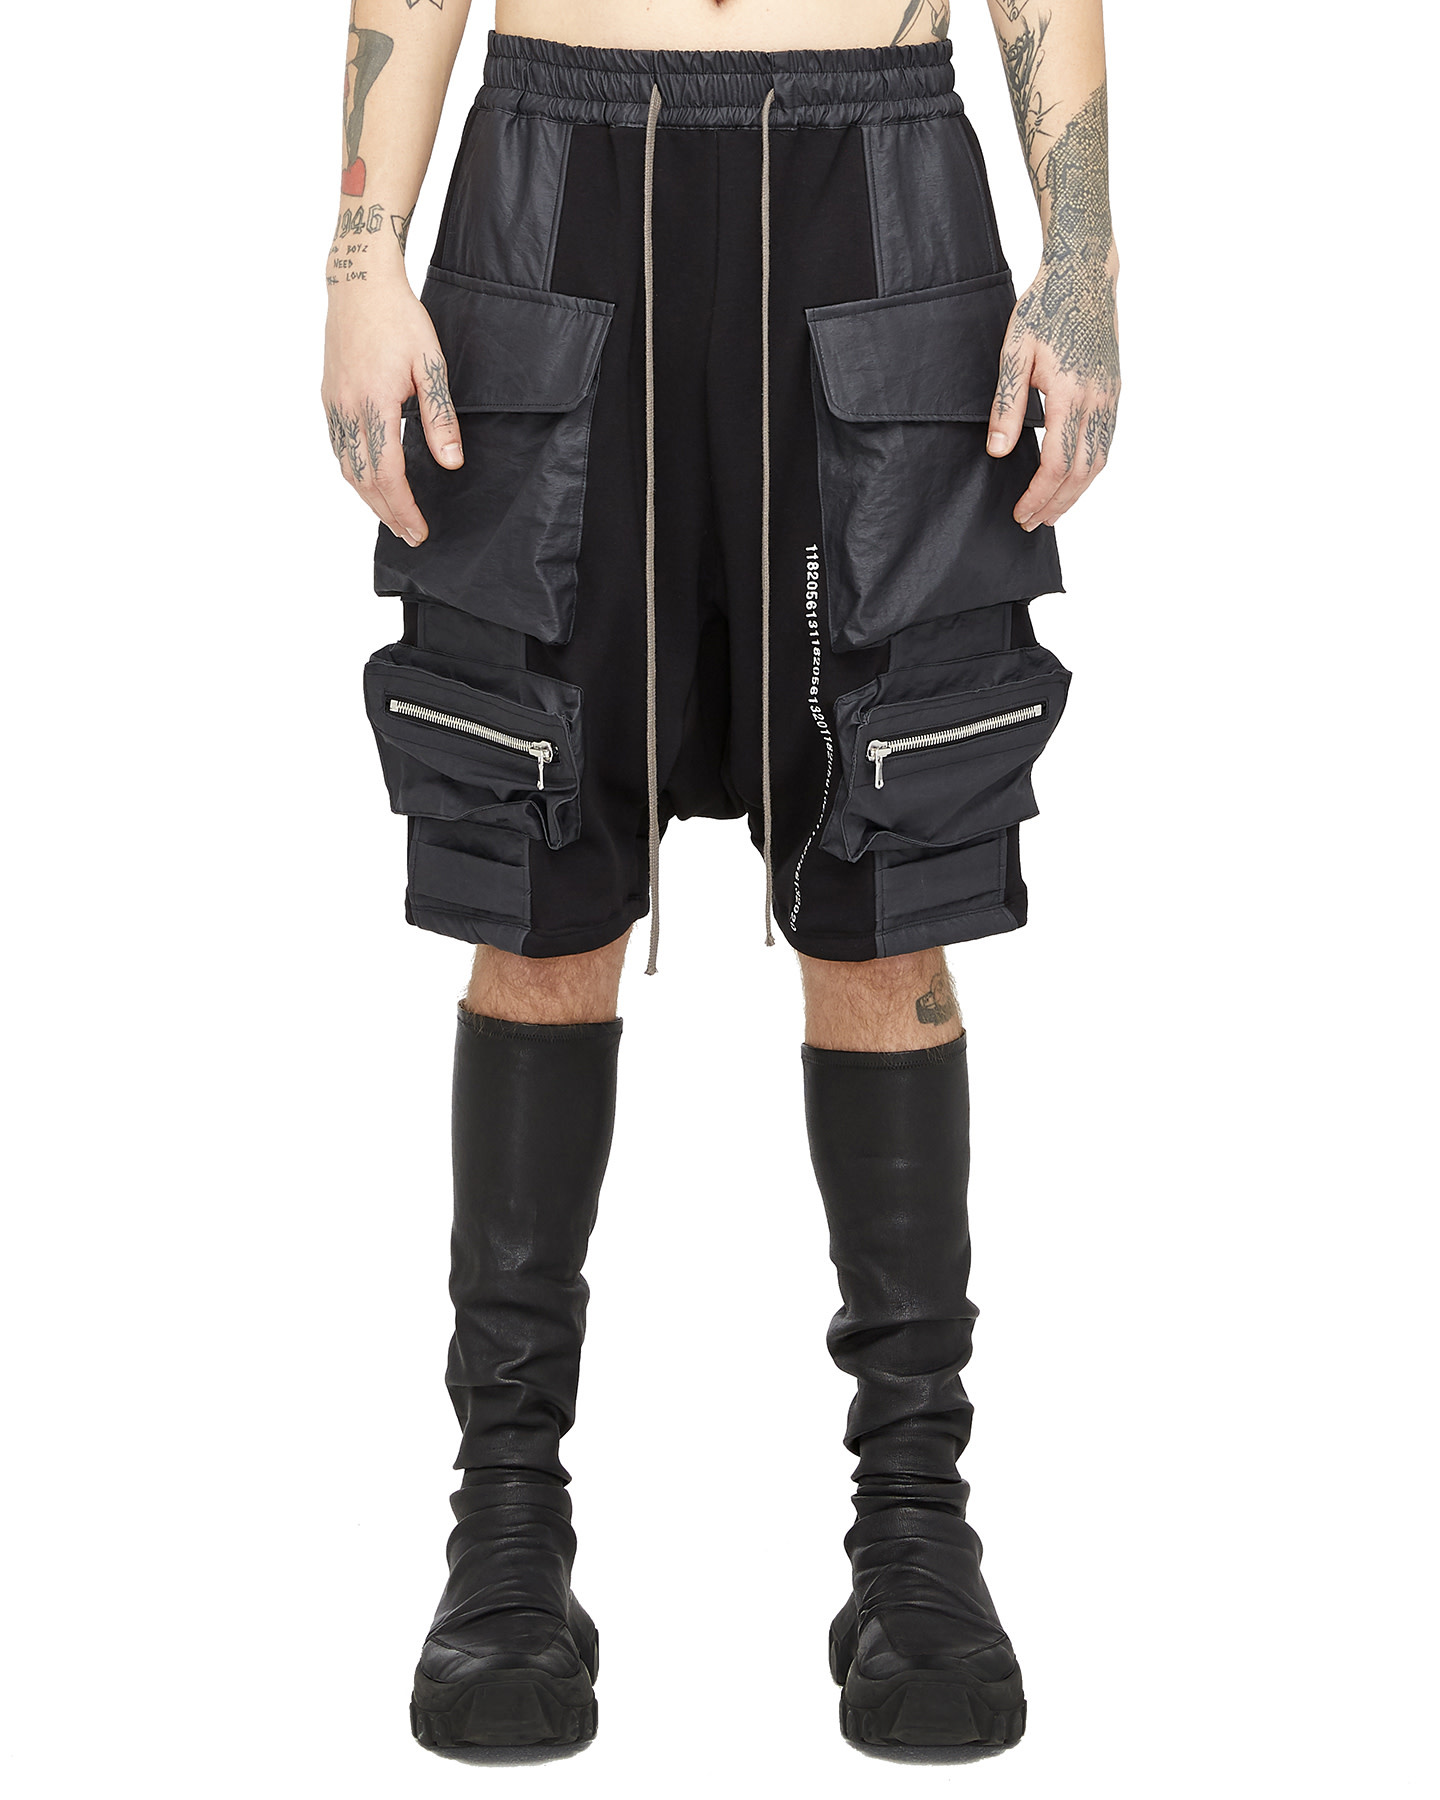 INSULATED DROP CROTCH CARGO SHORTS